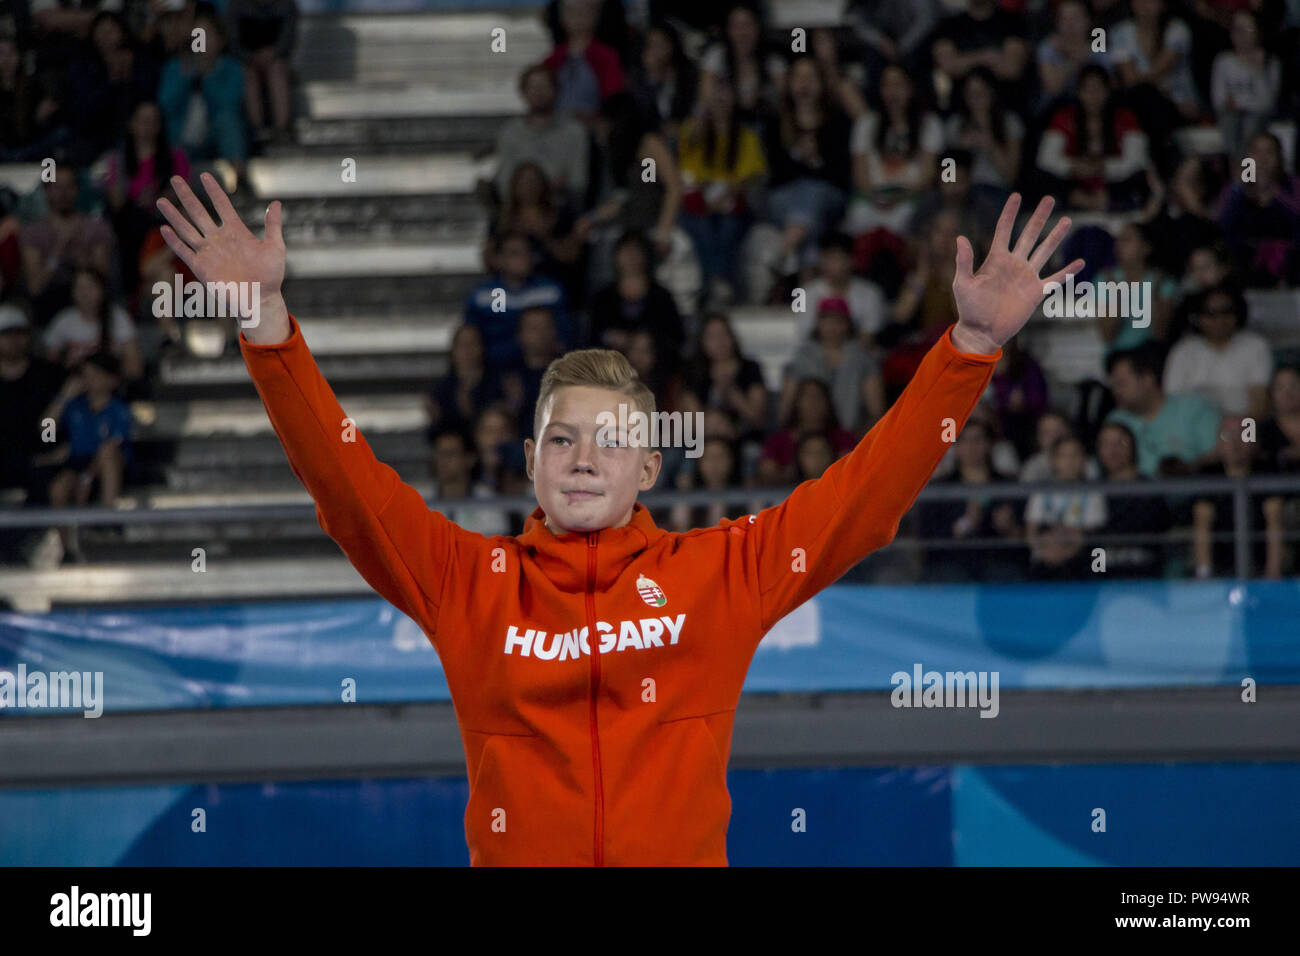 Buenos Aires, Buenos Aires, Argentina. 13th Oct, 2018. The Hungarian gymnast Balazs Krisztian of Male Artistic Gymnastics achieved the Silver Medal in the floor specialty of the 2018 Youth Olympic Games. Credit: Roberto Almeida Aveledo/ZUMA Wire/Alamy Live News Stock Photo